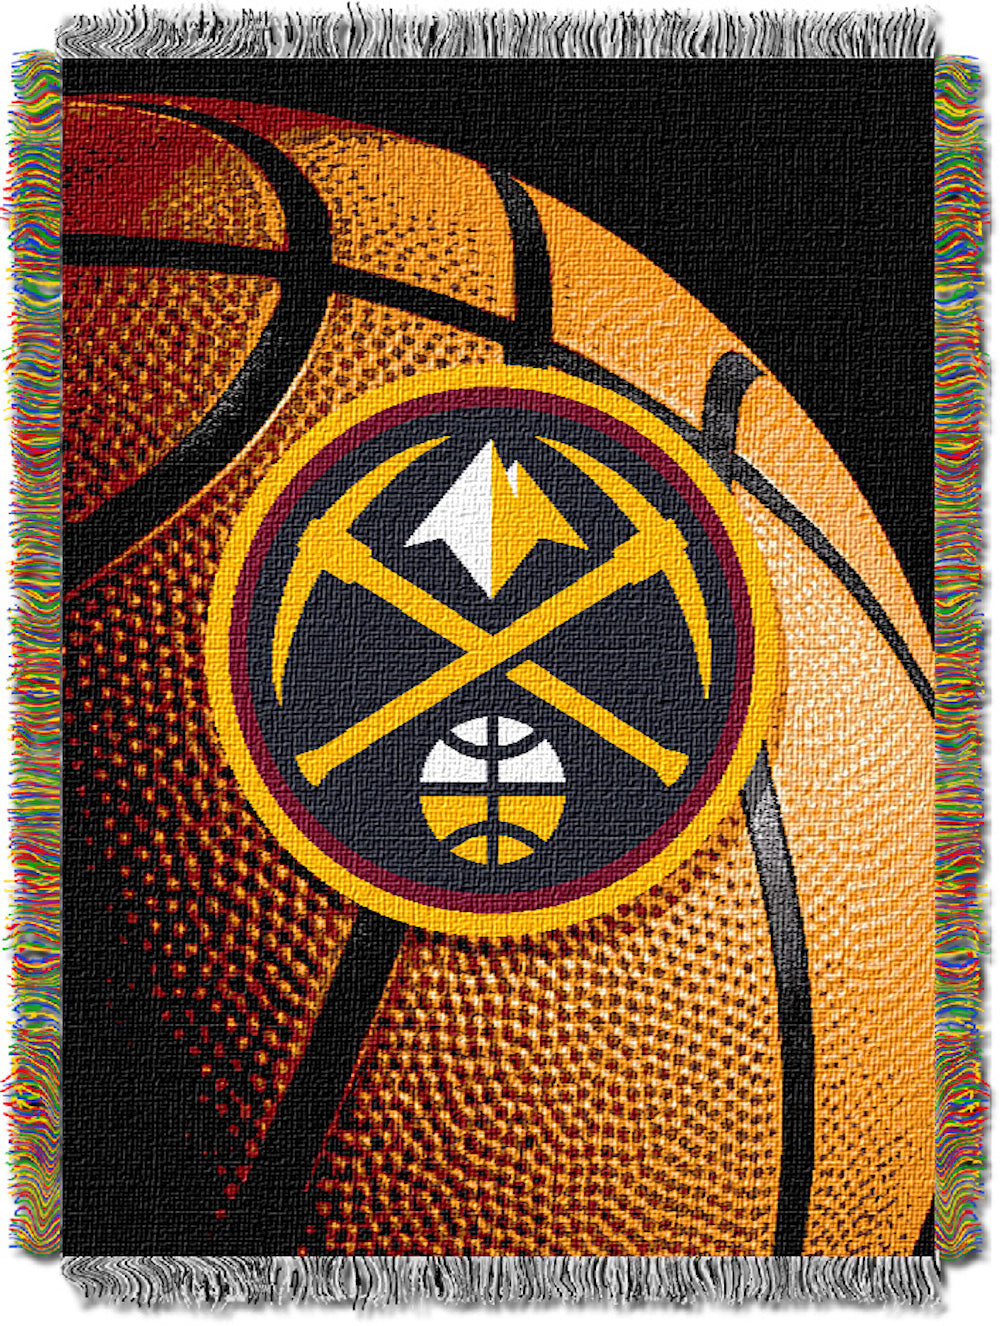 Denver Nuggets woven photo tapestry